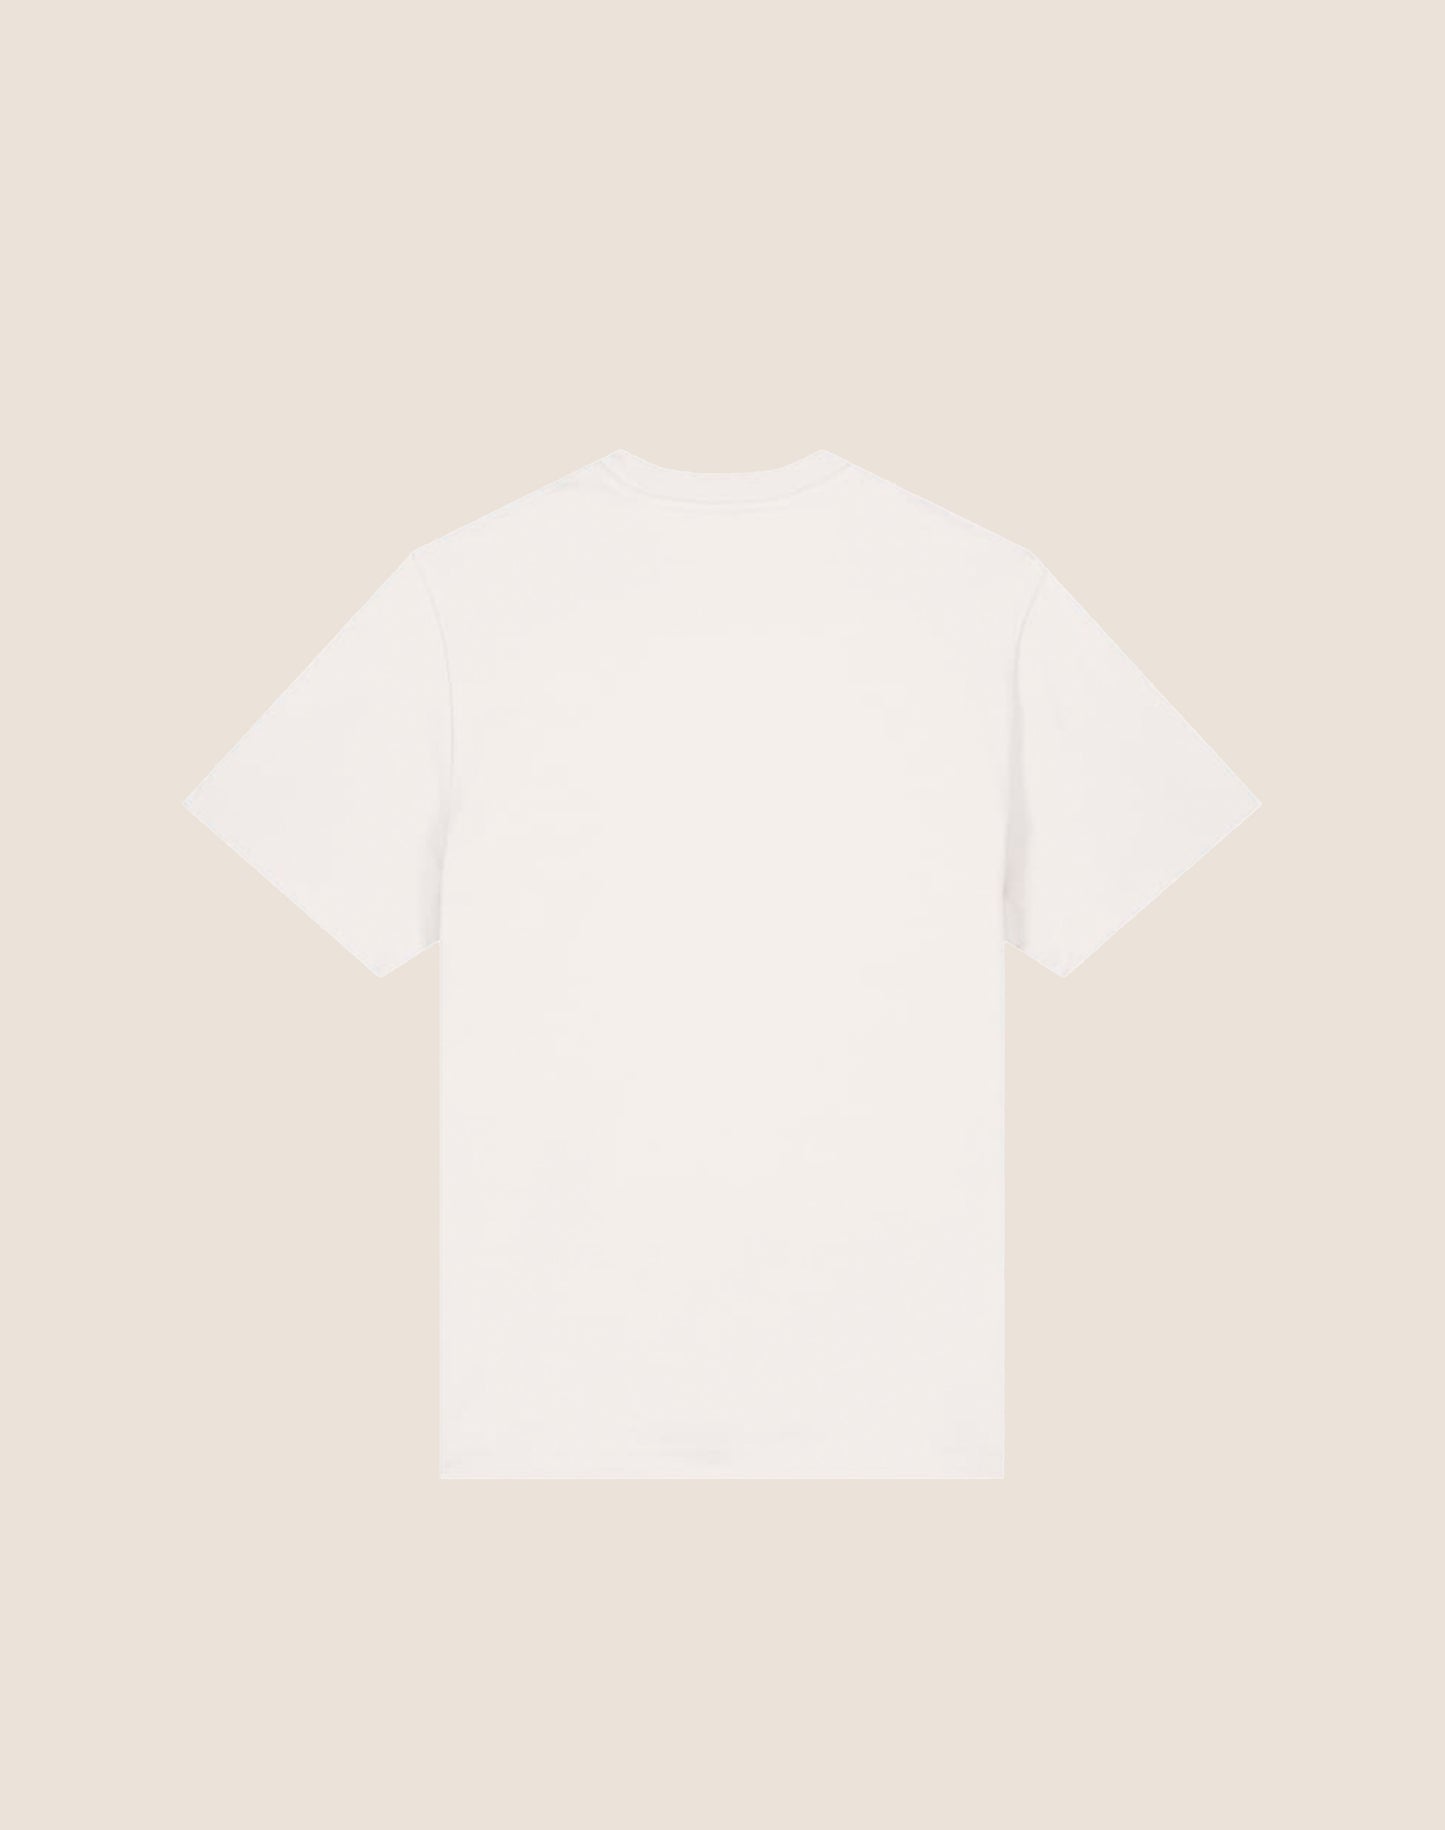 Outline tee